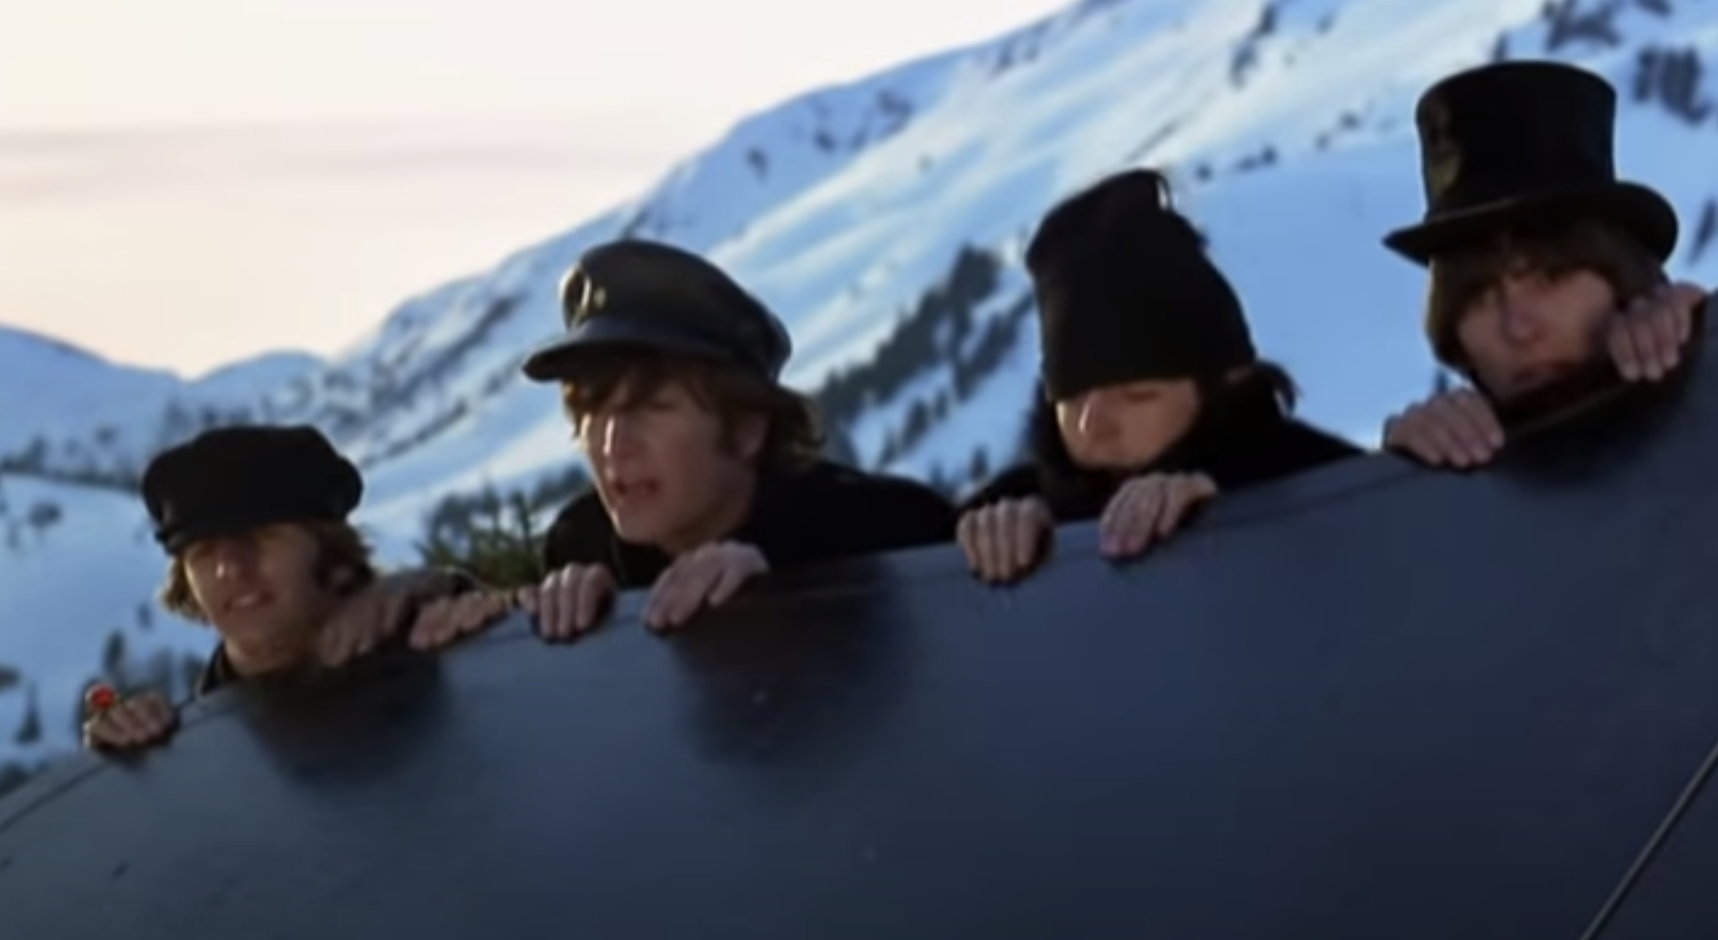 The four Beatles look over a ledge in the snowy alps